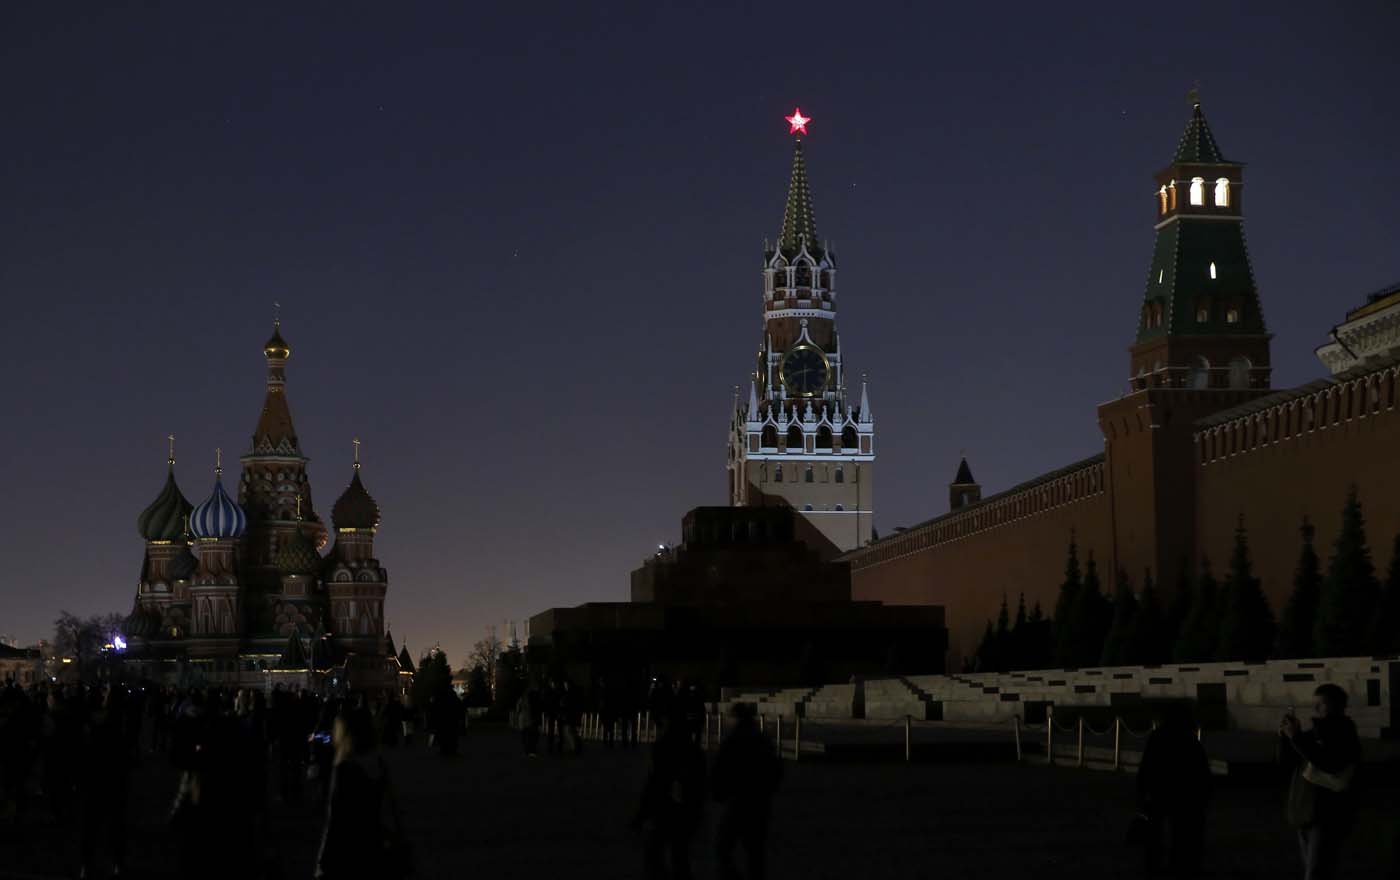 A view shows the St. Basil's Cathedral (L) and the Kremlin wall, after the lights were switched off for Earth Hour in Red Square in central Moscow, Russia, March 25, 2017. REUTERS/Maxim Shemetov